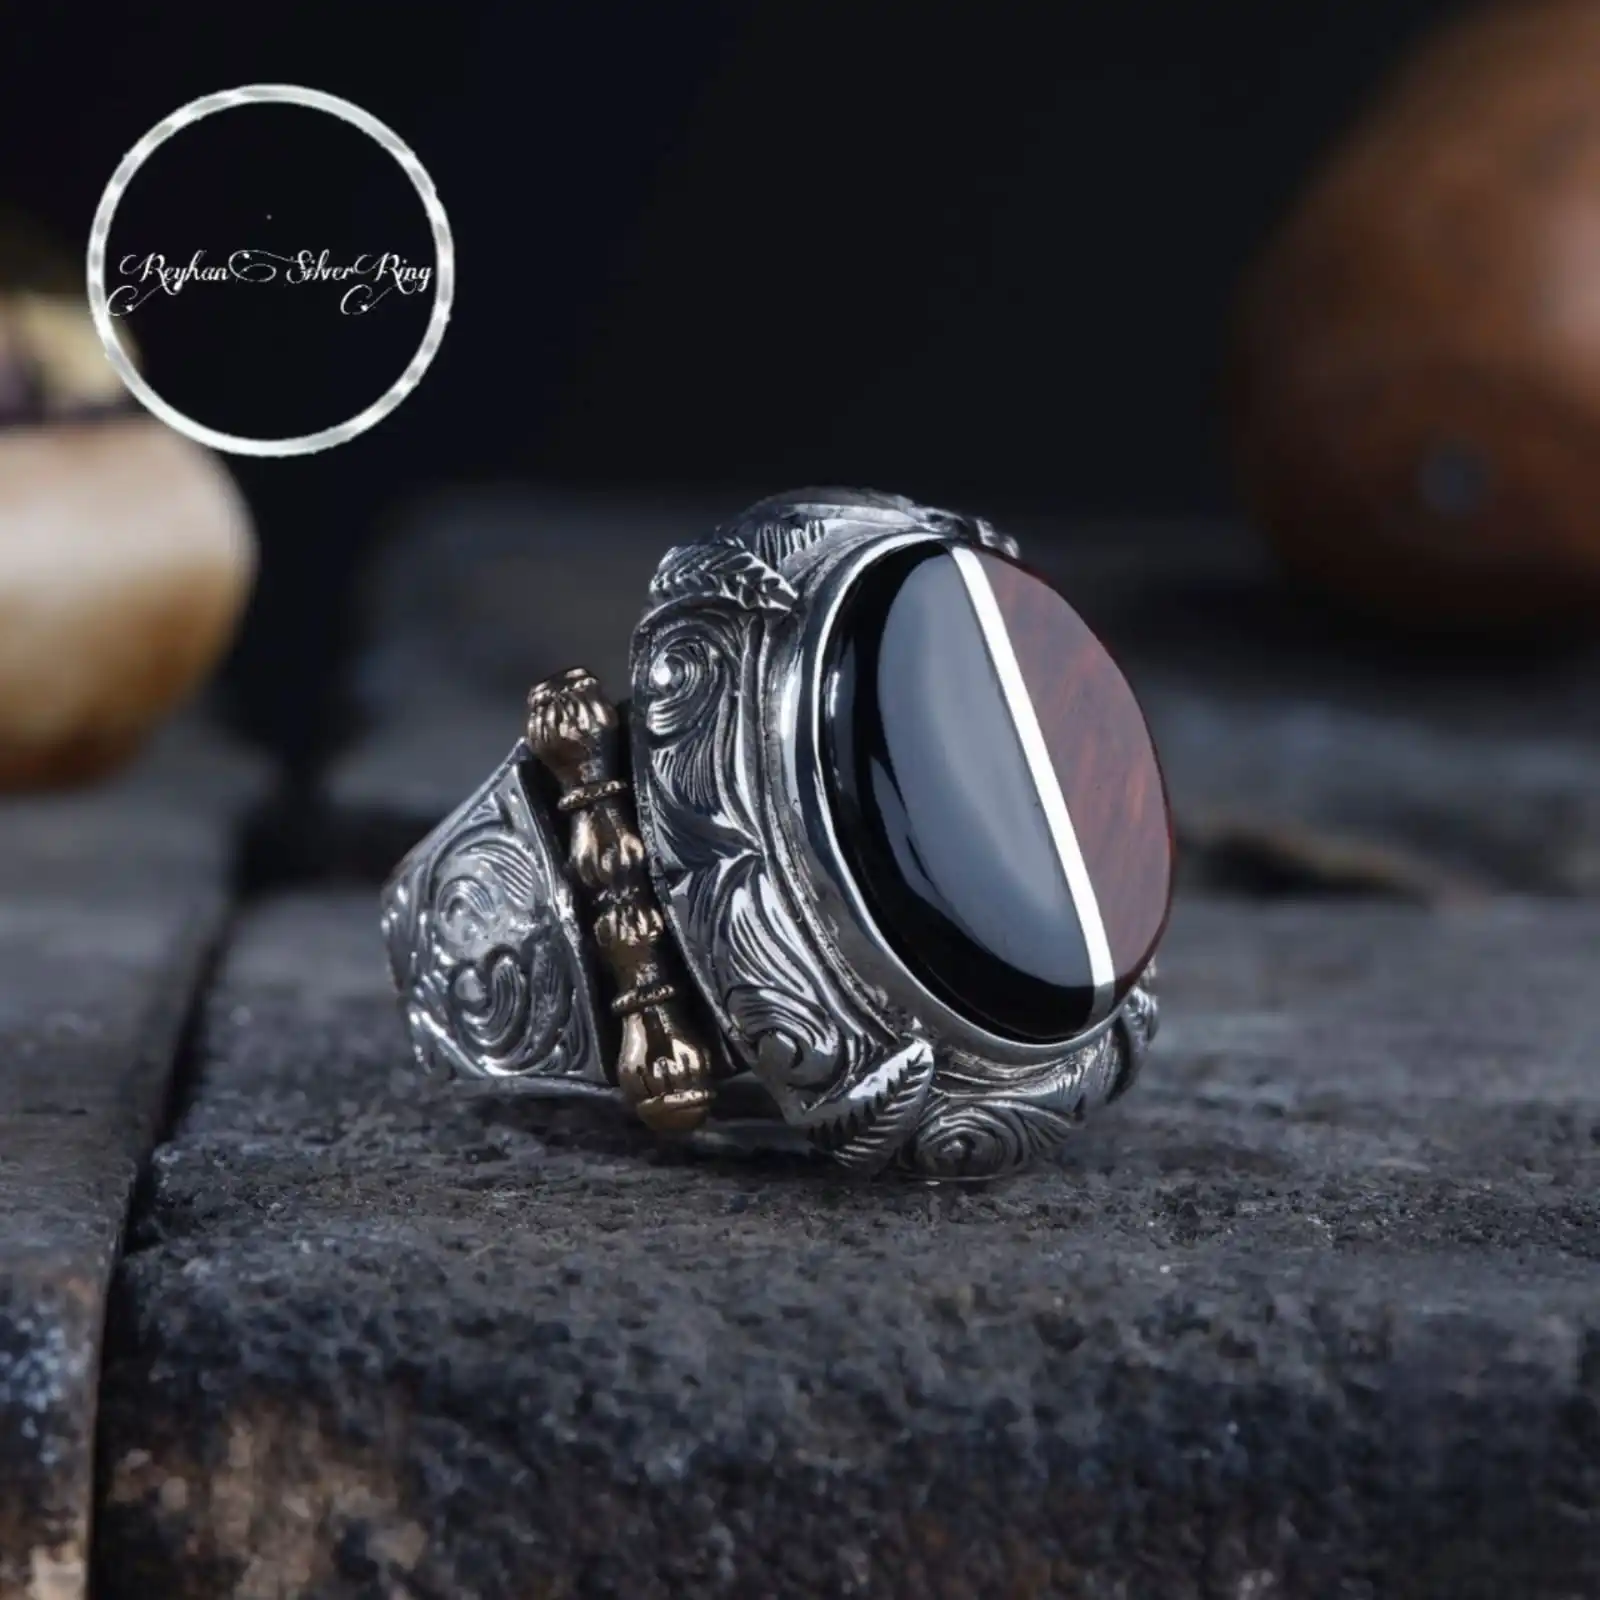 Handcrafted Silver Inlaid Men's Ring with Coca and Oltu Stone - Unique Splitting and Pencil Engraved Design shanxi wutaishan specialty chengni inkstone platform with cover clearance houtian original stone study four treasures calligraph